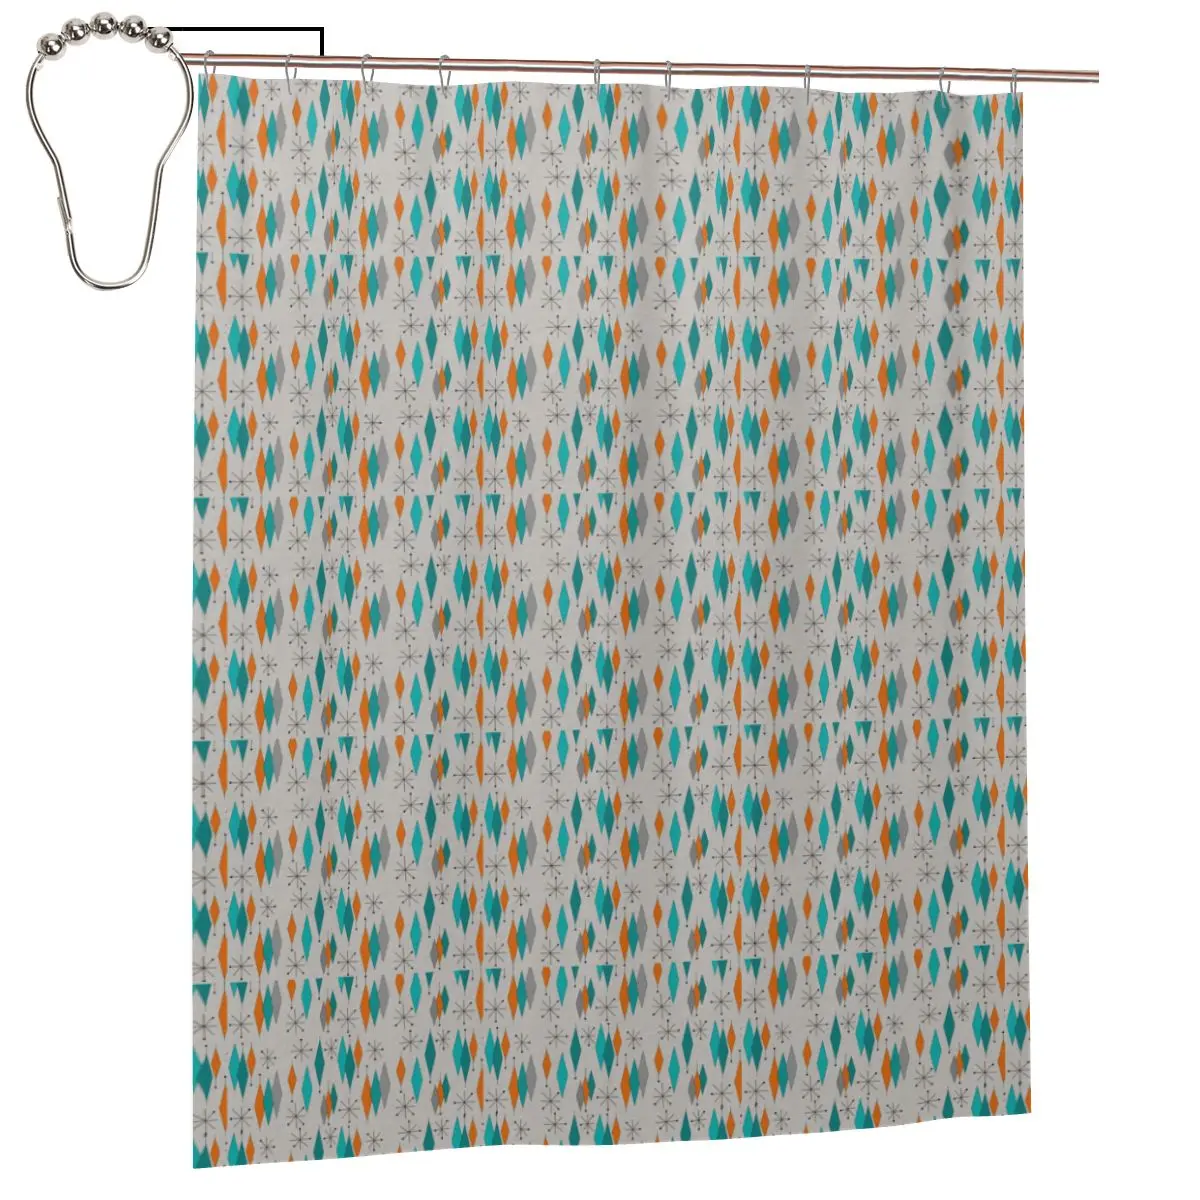 

Mid Century Modern Shower Curtain for Bathroon Personalized Funny Bath Curtain Set with Iron Hooks Home Decor Gift 60x72in